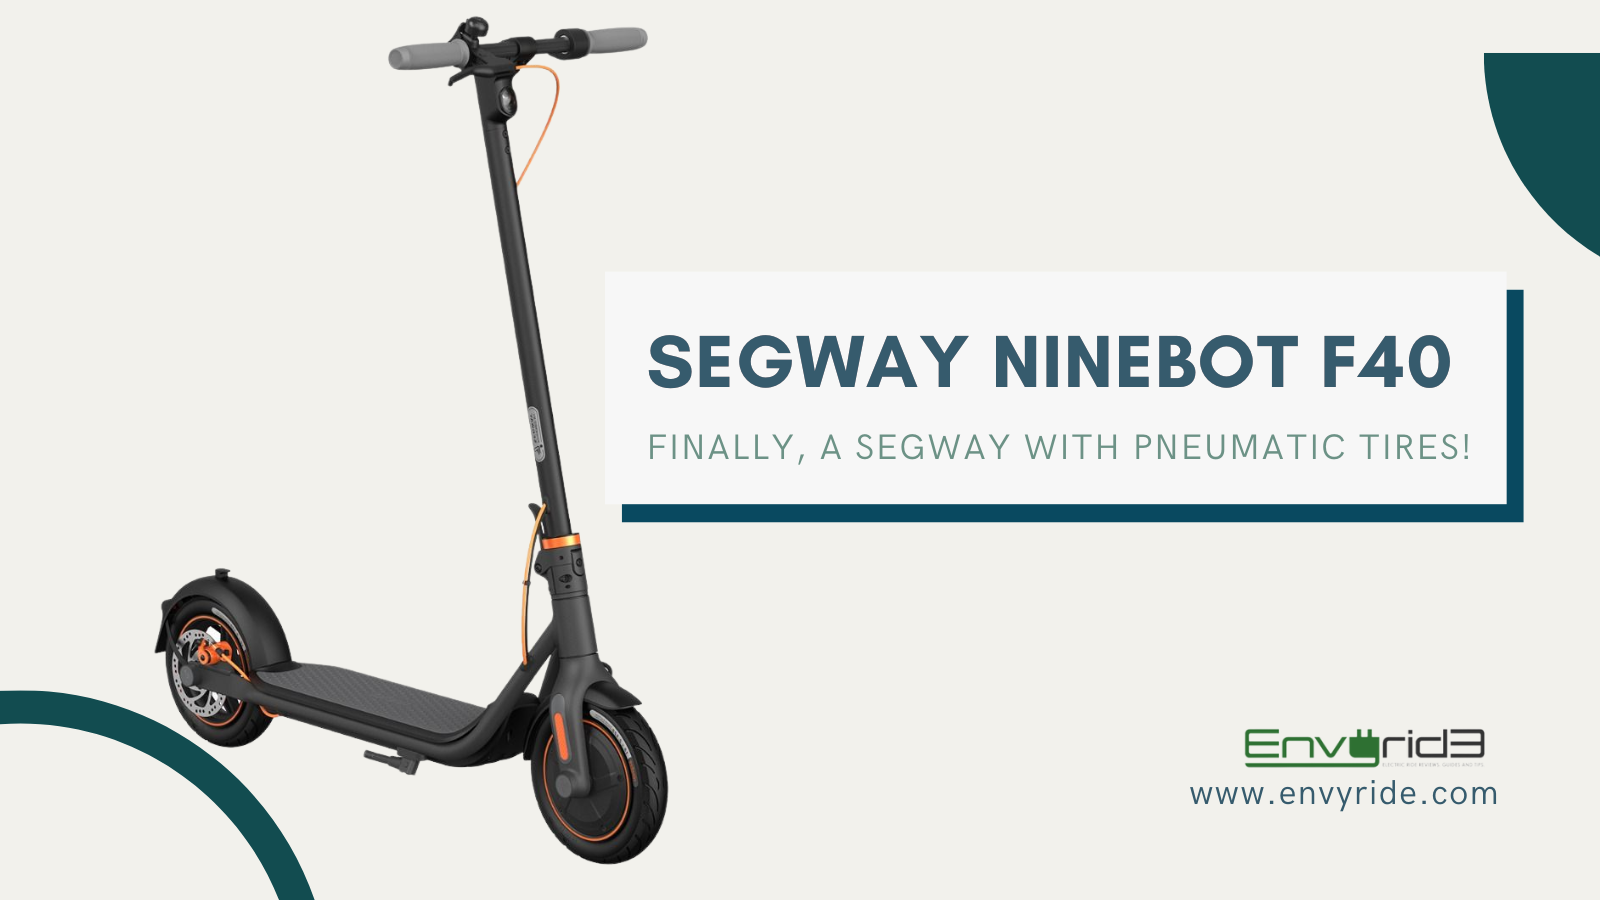 Segway Ninebot F40: Finally, A Segway with Pneumatic tires 